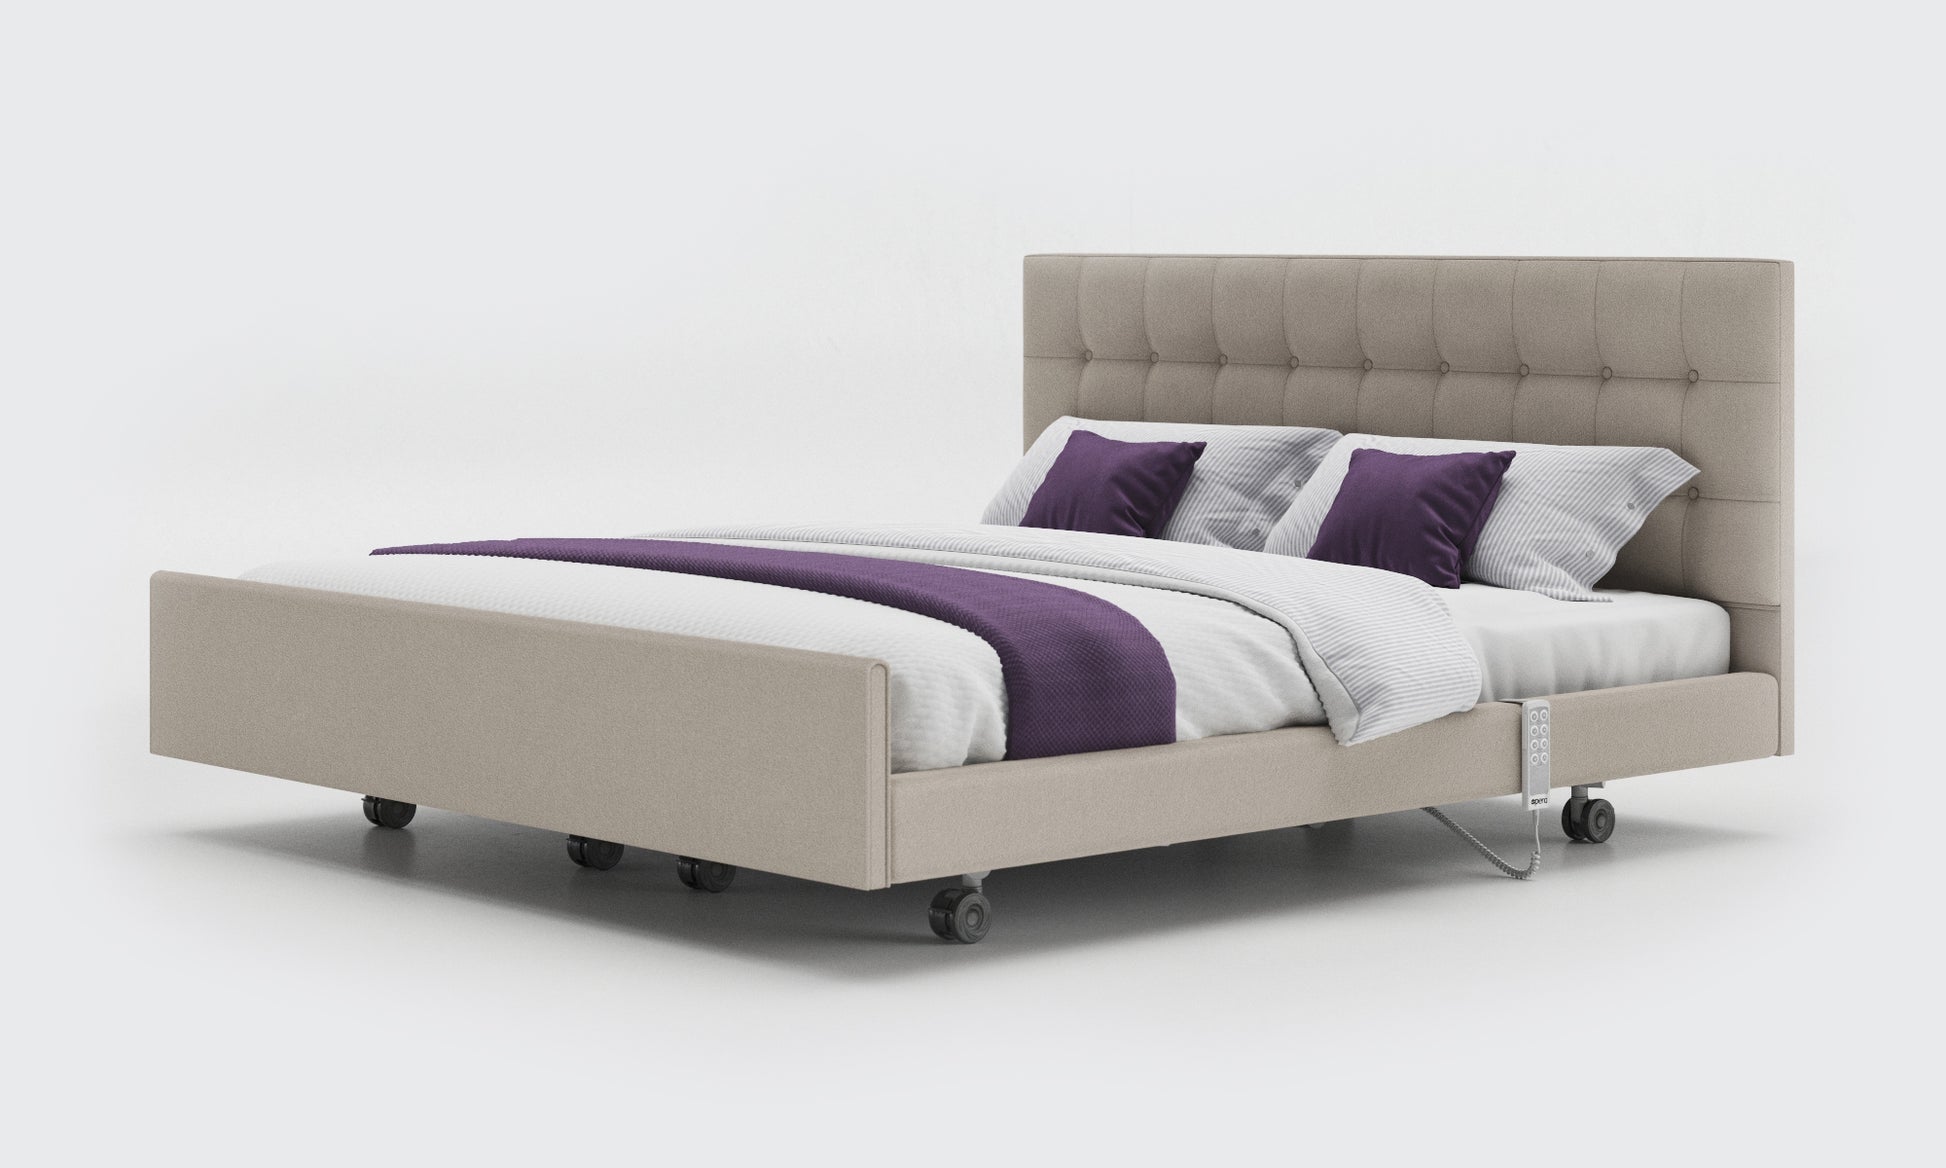 Linen Fabric Signature Comfort Dual Profiling Bed With an Emerald Headboard